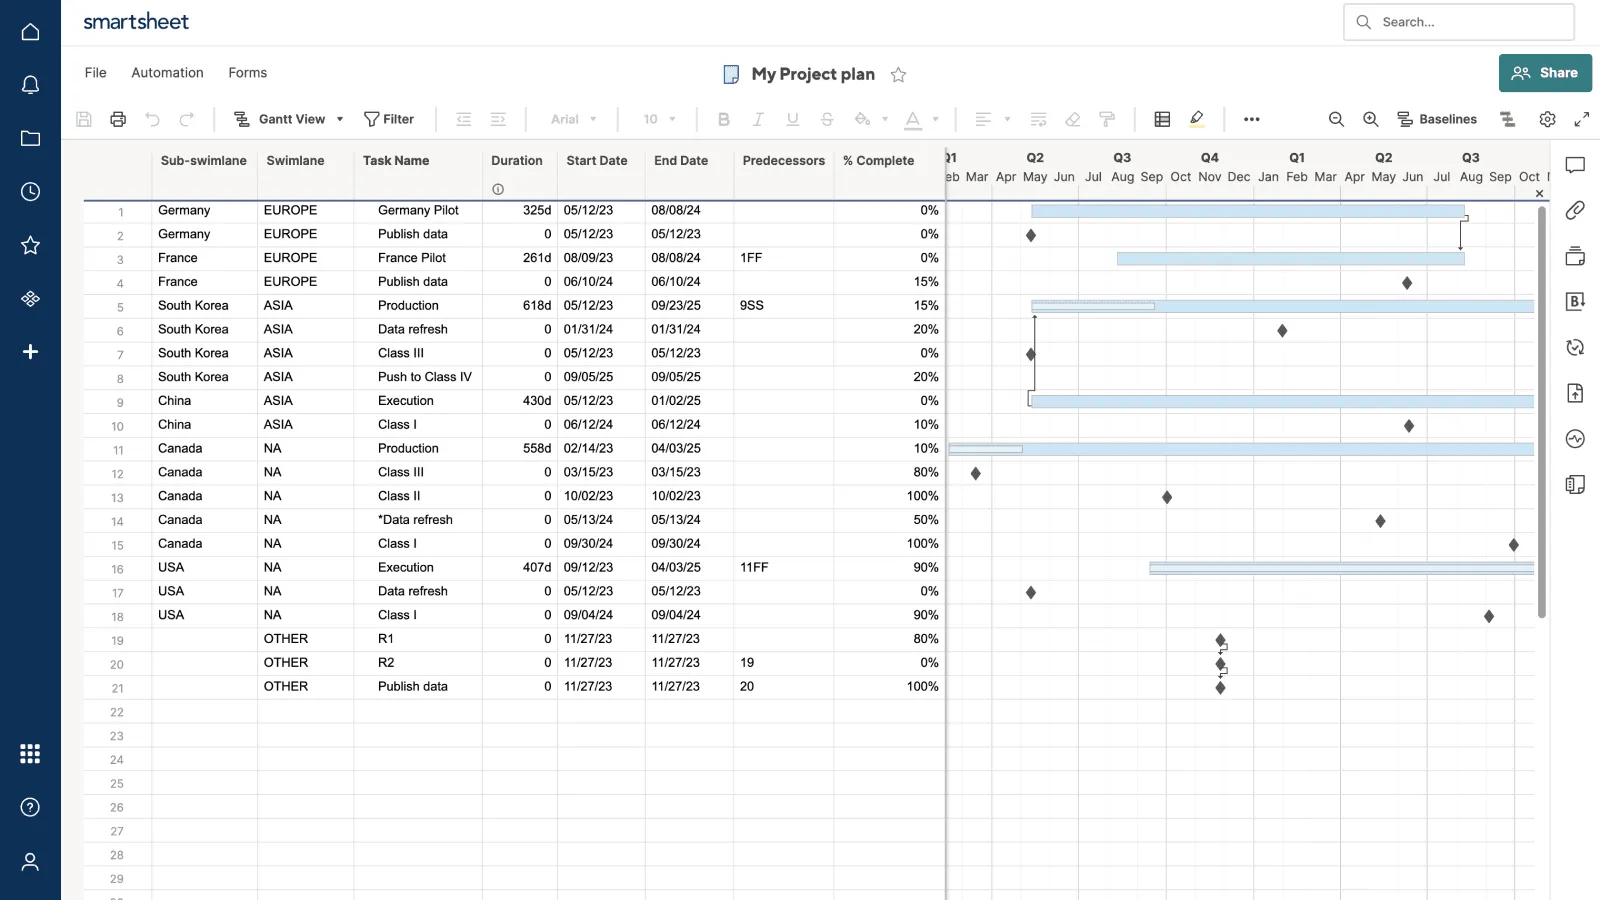 Project data in Smartsheet before importing into Office Timeline Expert